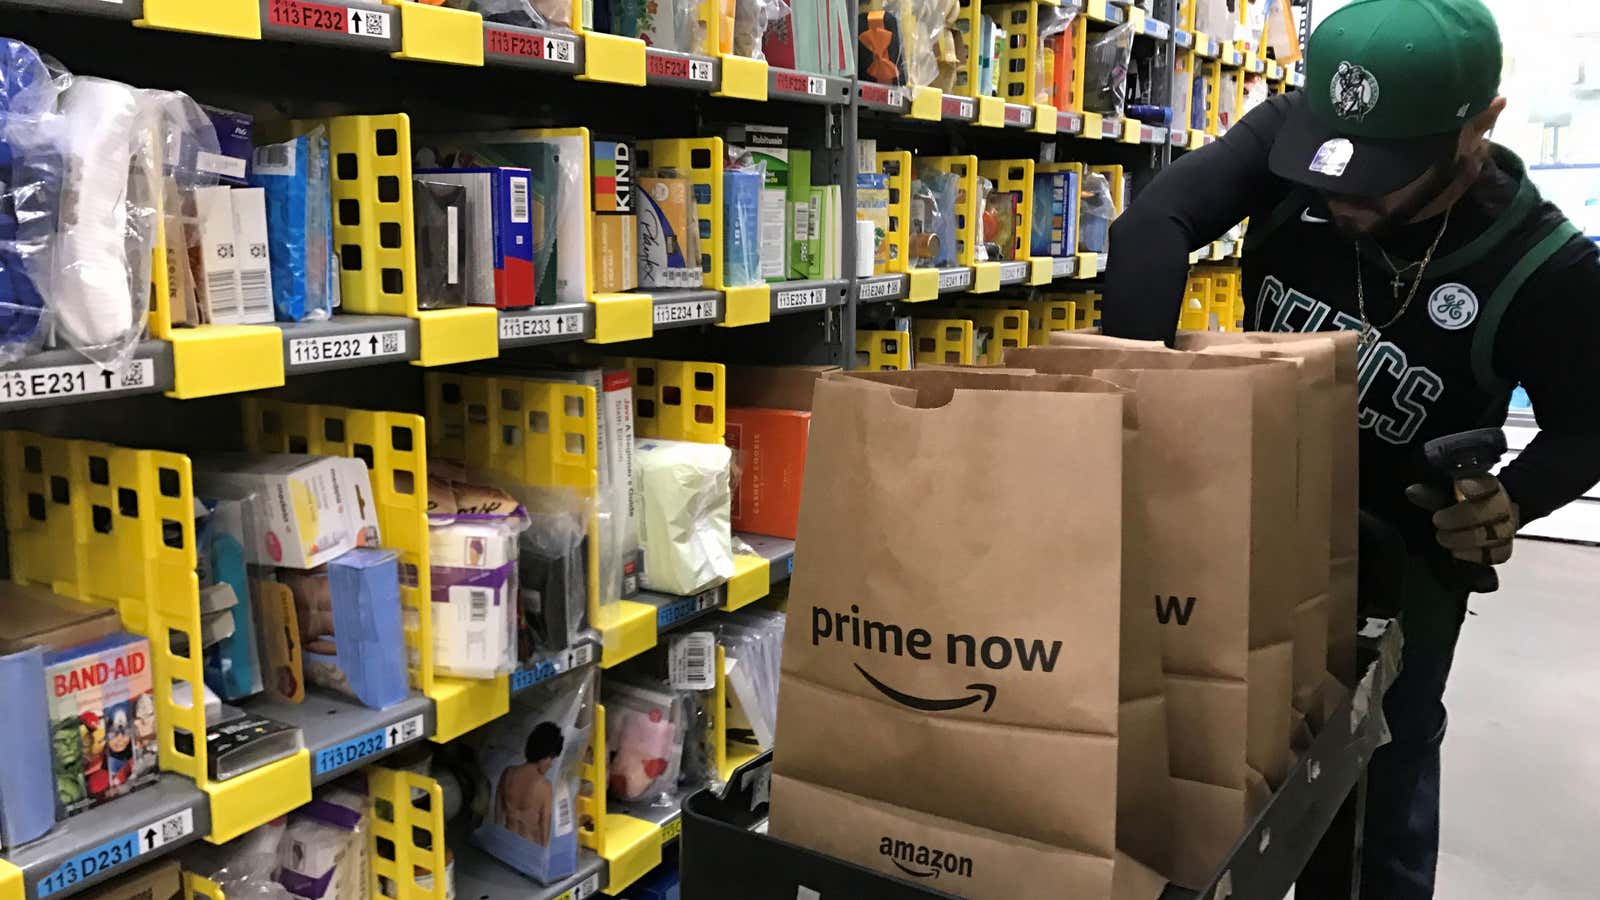 Amazon announced this week that it would pay workers no less than $15 per hour.